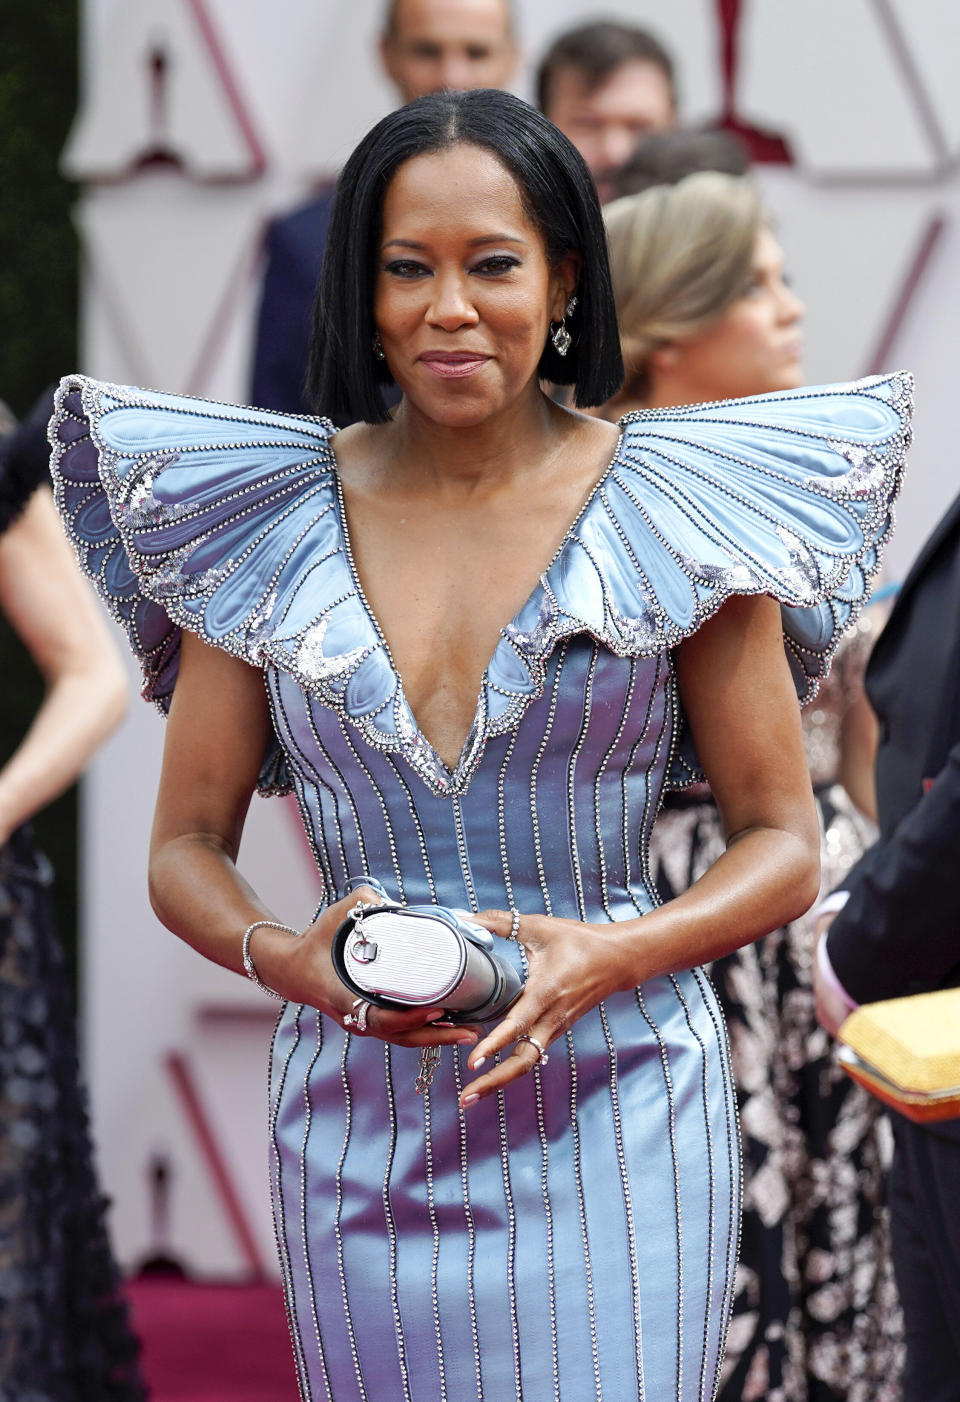 Regina King attends the 93rd annual Academy Awards on Sunday.  (Photo: Pool via Getty Images)